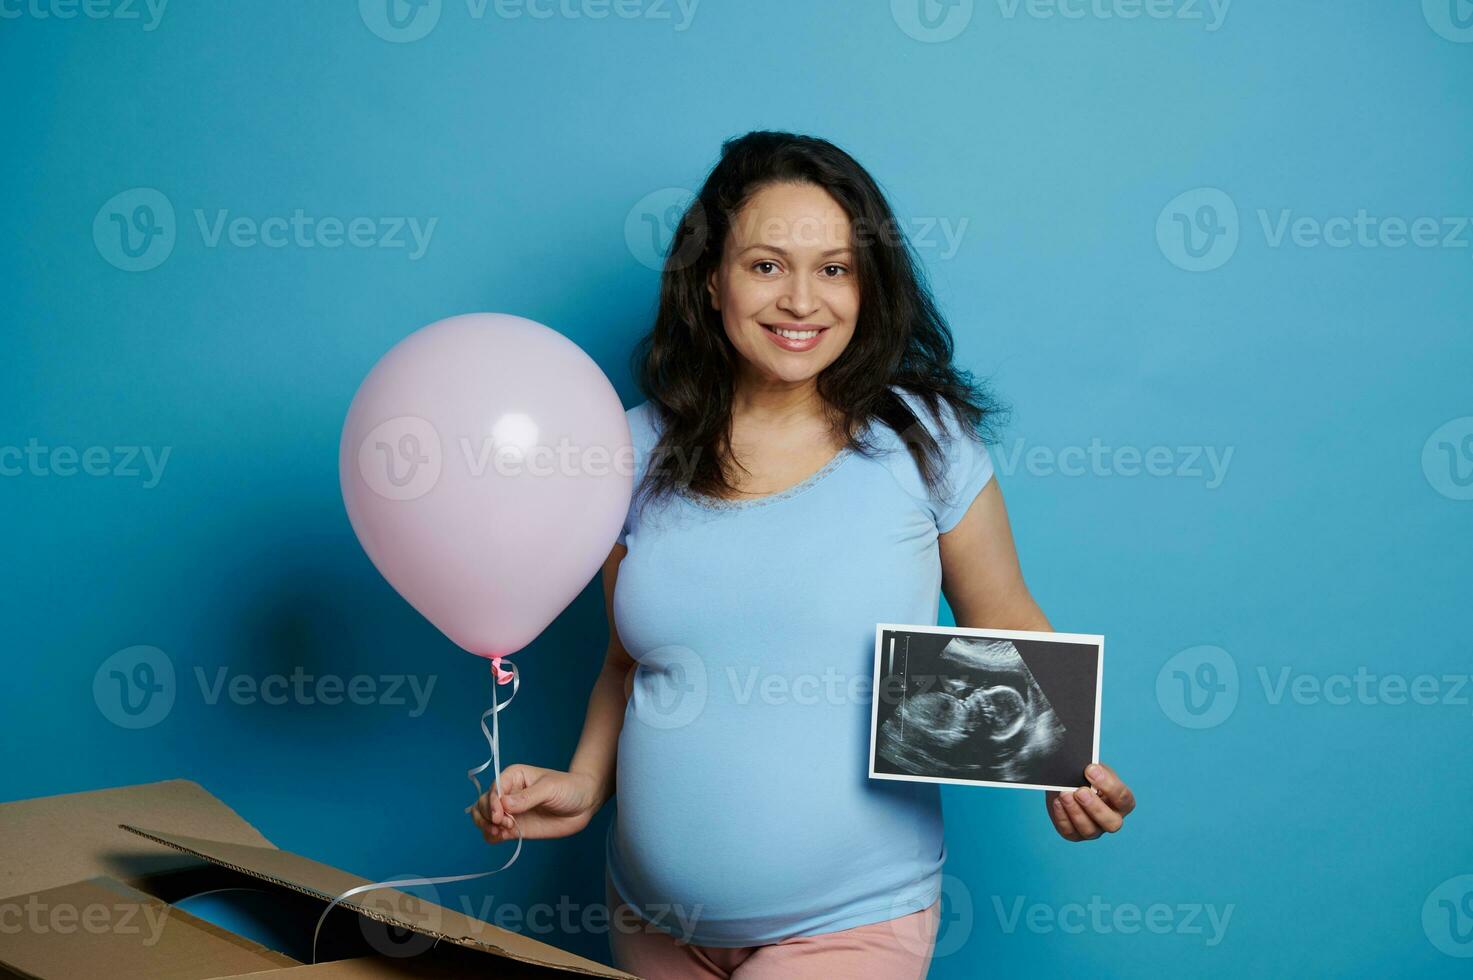 Pregnant woman expecting a baby girl, smiles cheerfully, posing with pink balloon and ultrasound image, isolated on pink photo